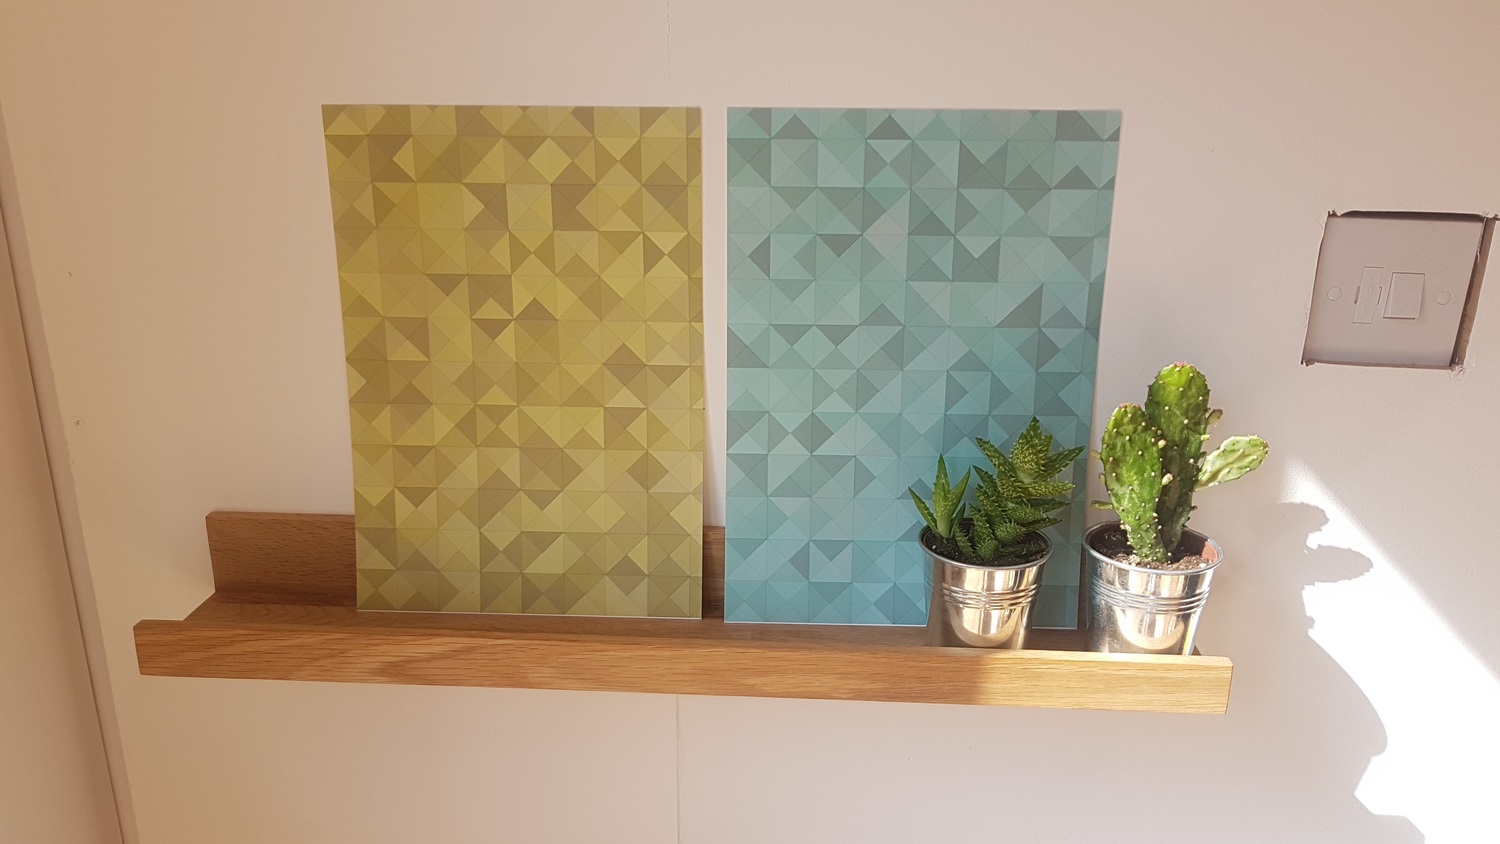 posters of coulered squares with triangles in them on a shelf